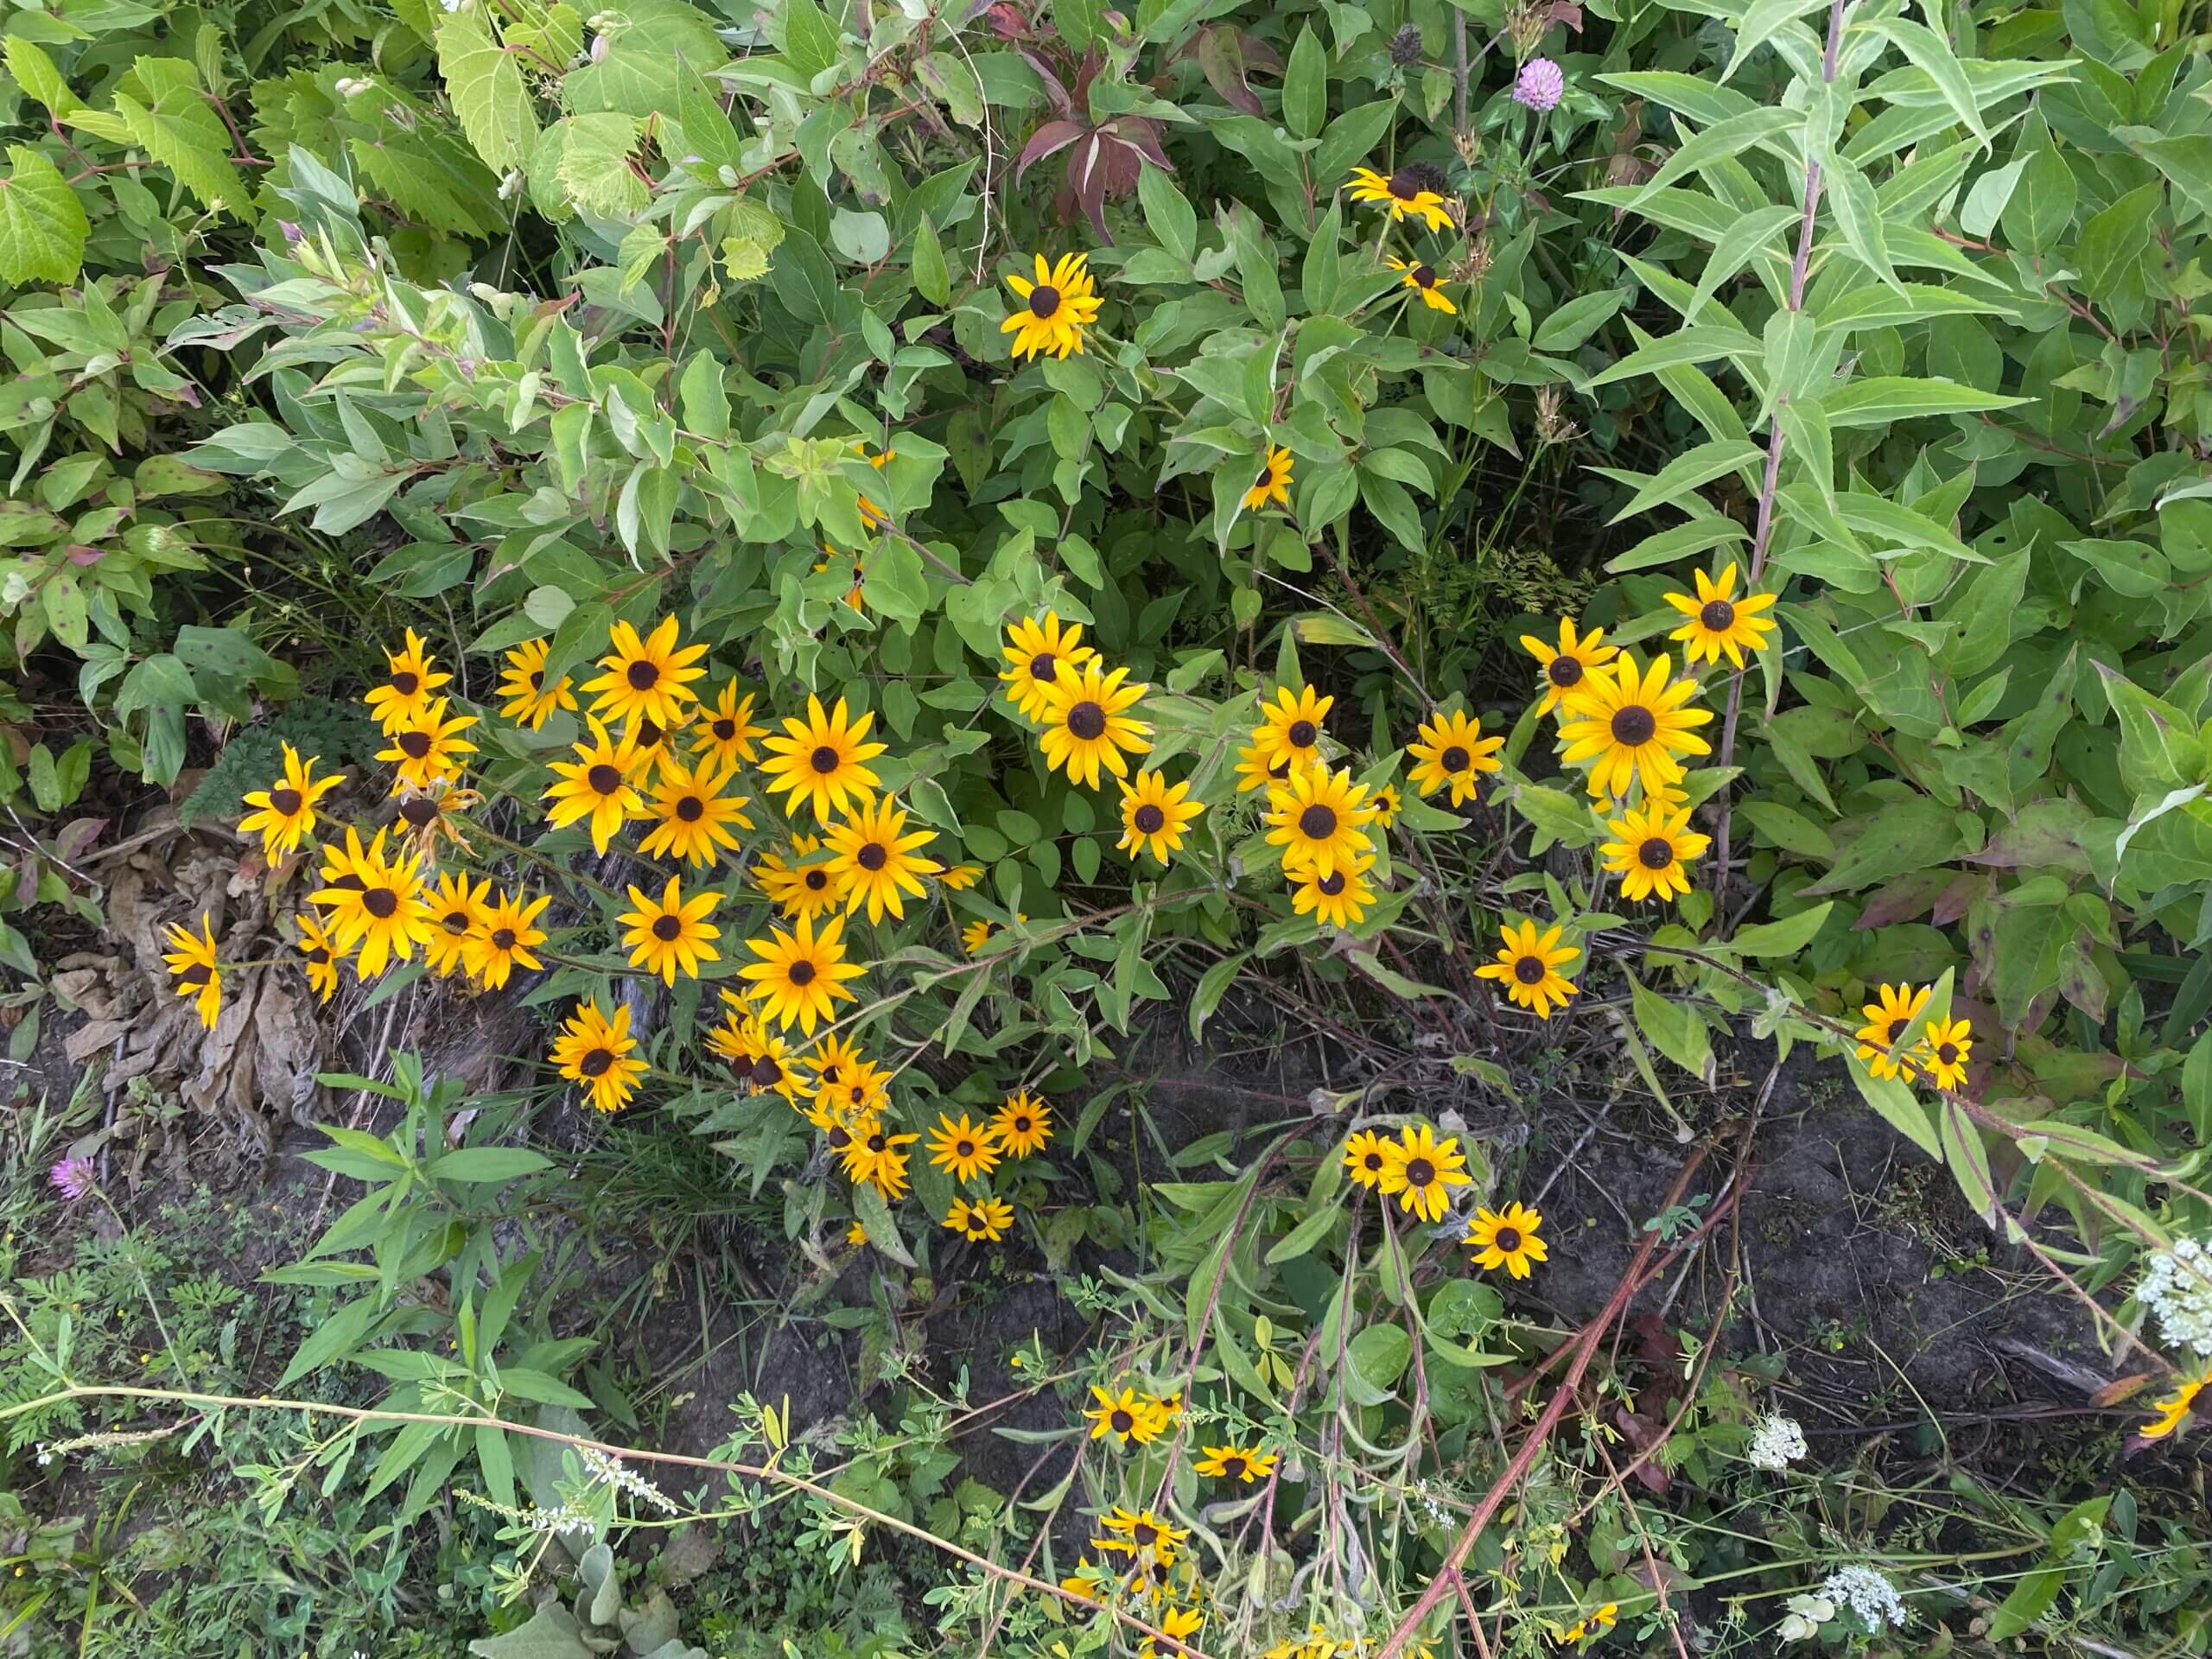 Yellow wildflowers in a grassy area.